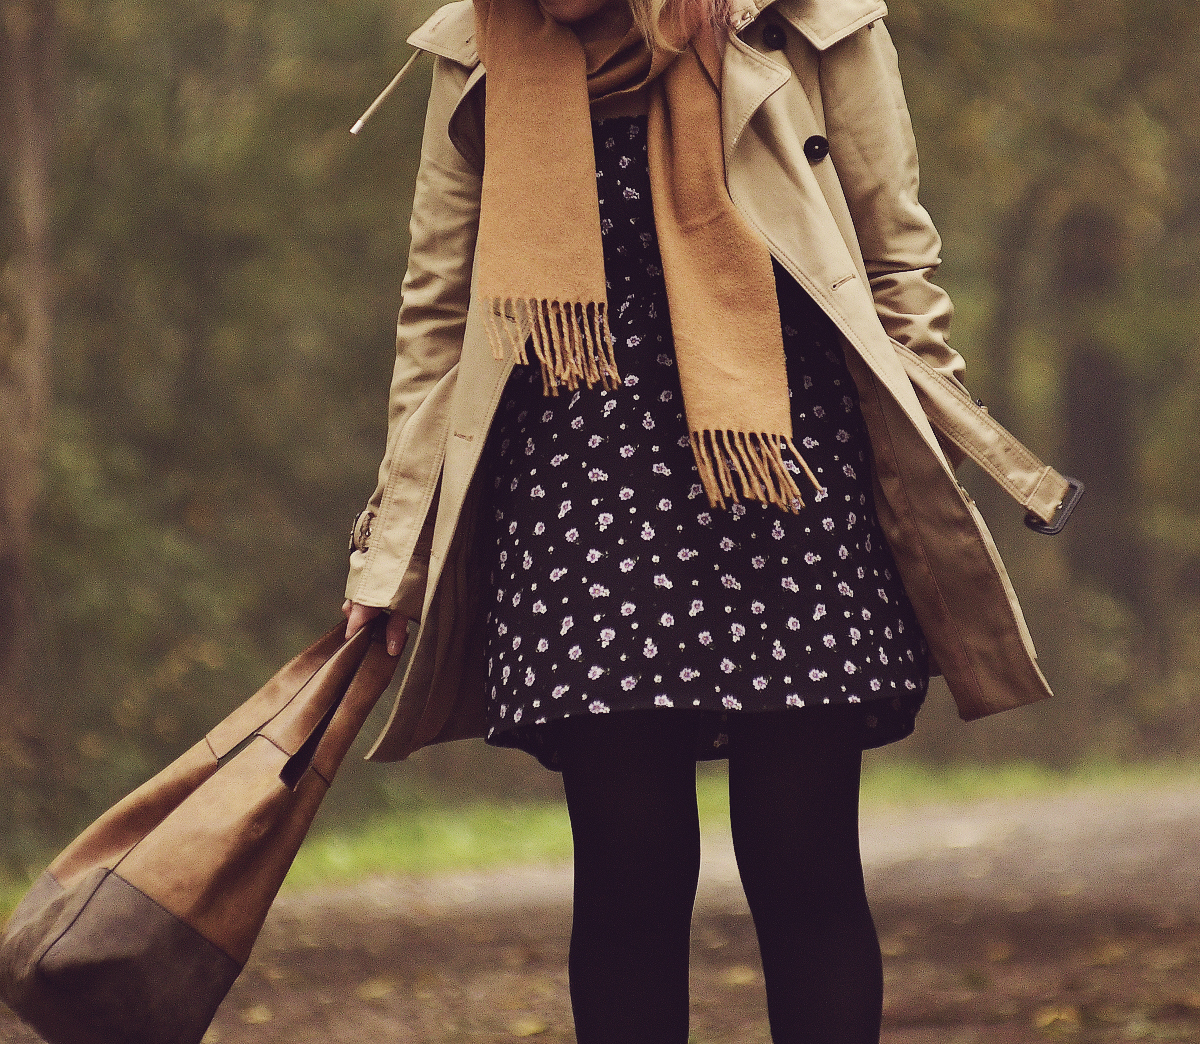 autumn look, fall look, autumn in the woods, trench coat, cashmere scarf, floral dress, brown LiuJo bag, autumn colors